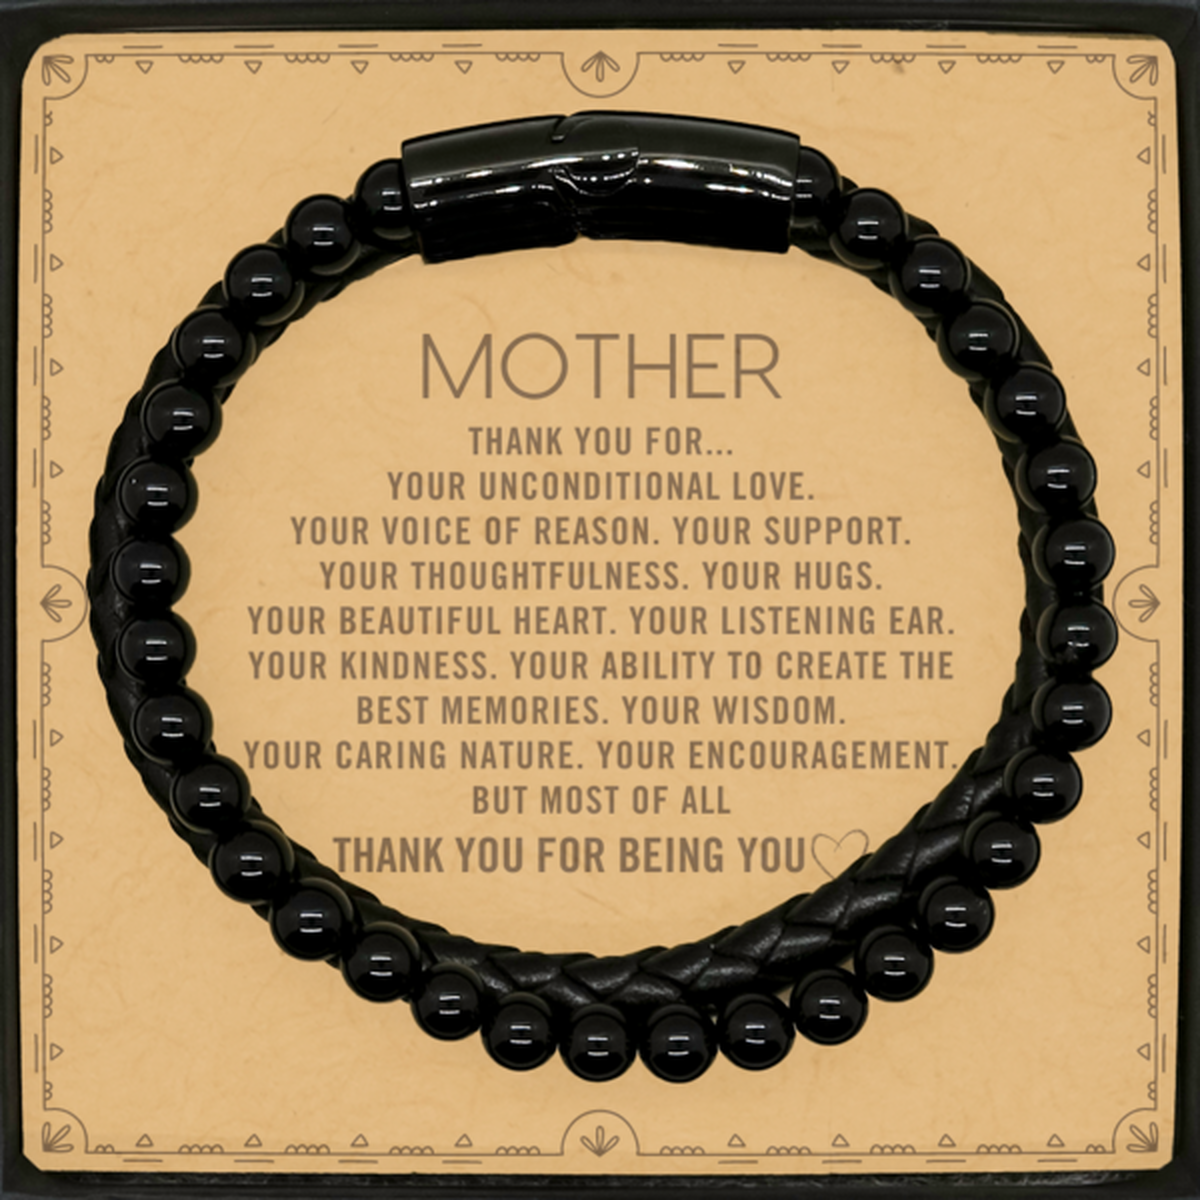 Mother Stone Leather Bracelets Custom, Message Card Gifts For Mother Christmas Graduation Birthday Gifts for Men Women Mother Thank you for Your unconditional love